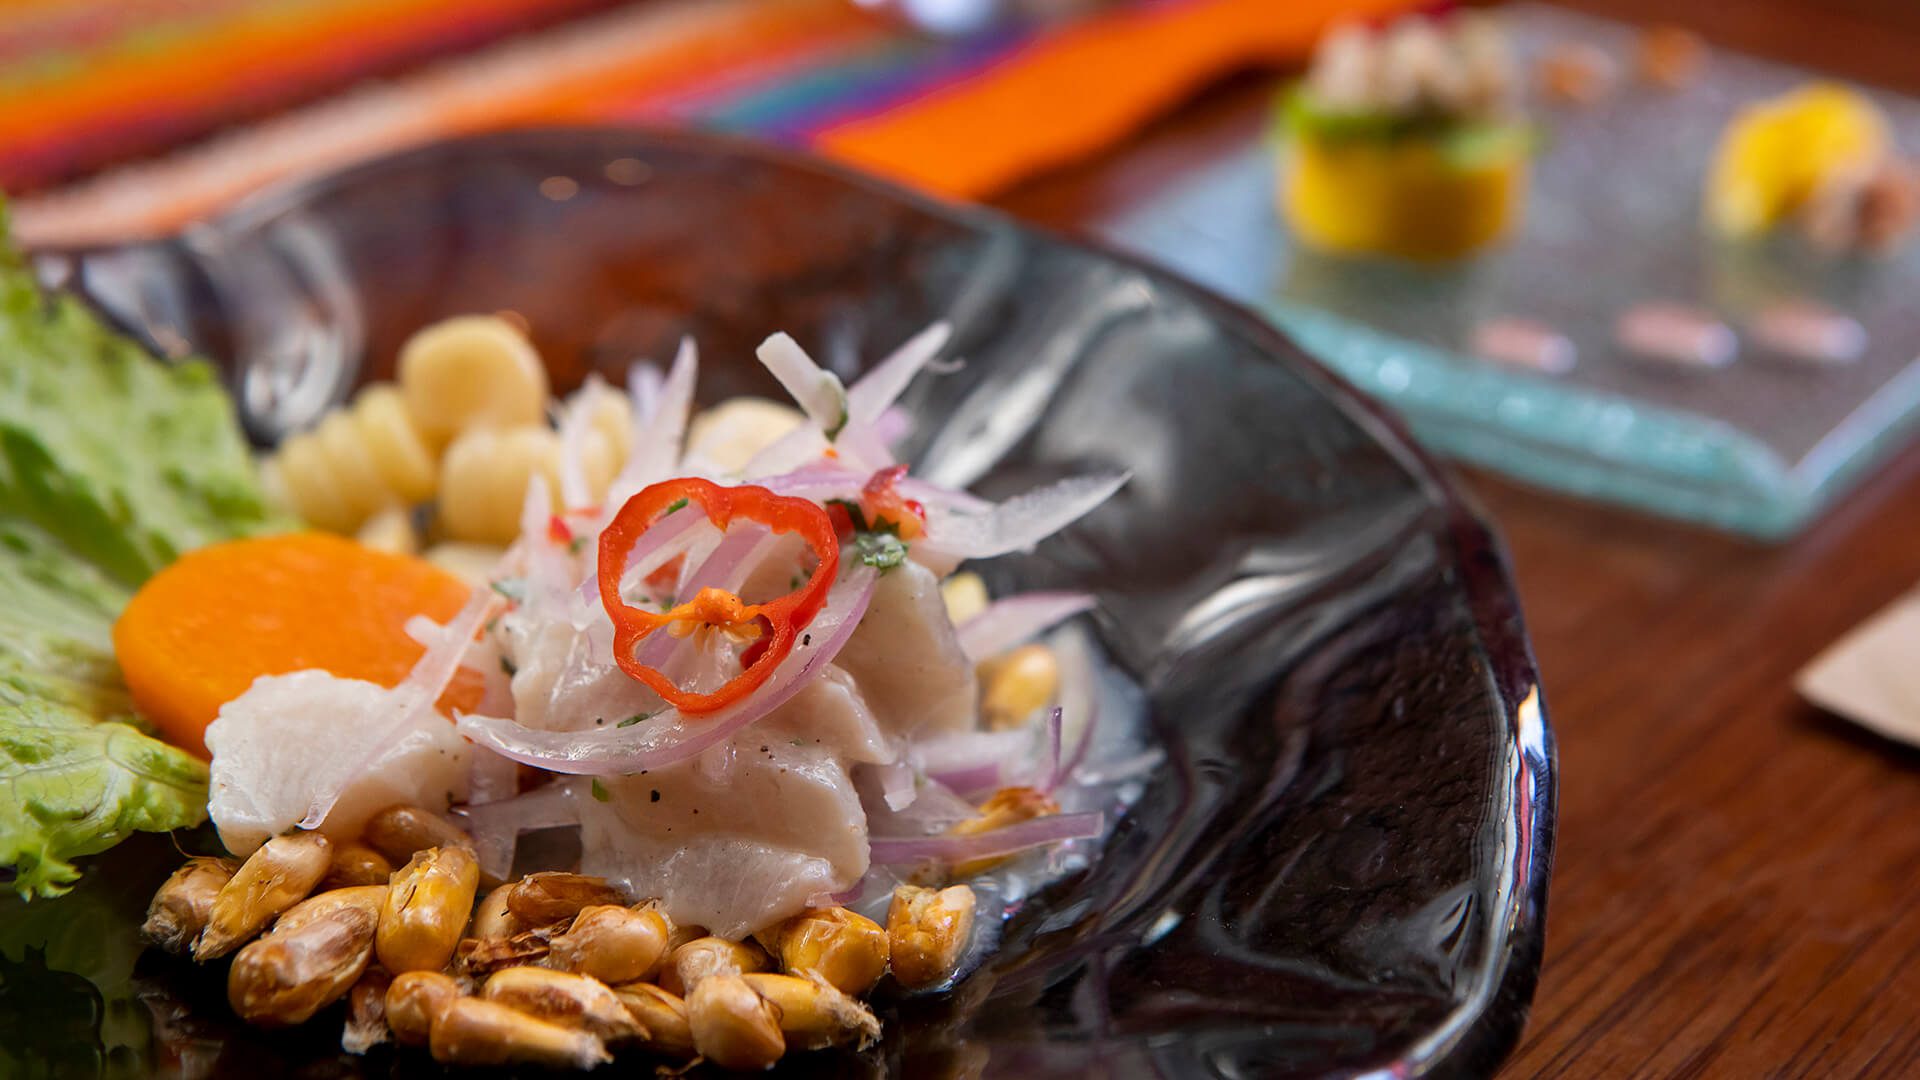 A close-up to a ceviche dish revealing all its ingredients - RESPONSible Travel Peru